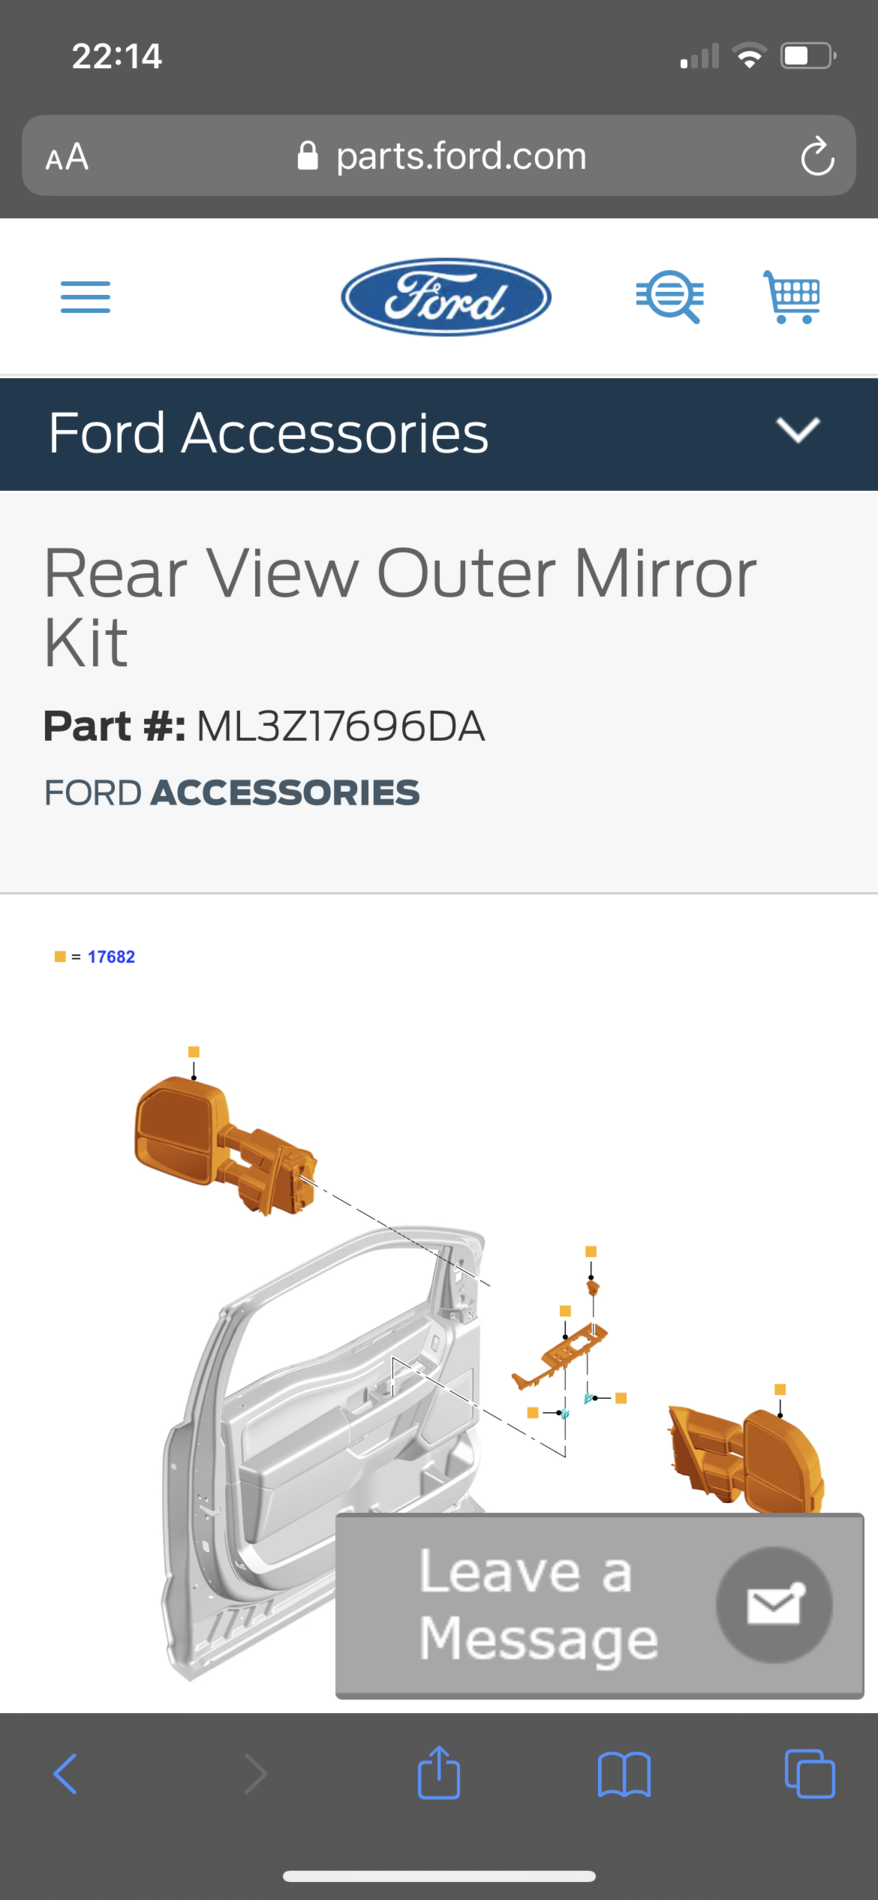 Ford F-150 Trailer tow mirrors with BLIS (Blind Spot Information System) vs Standard Mirrors 7C5BE10D-FA30-4383-A6D2-4FD426946C47